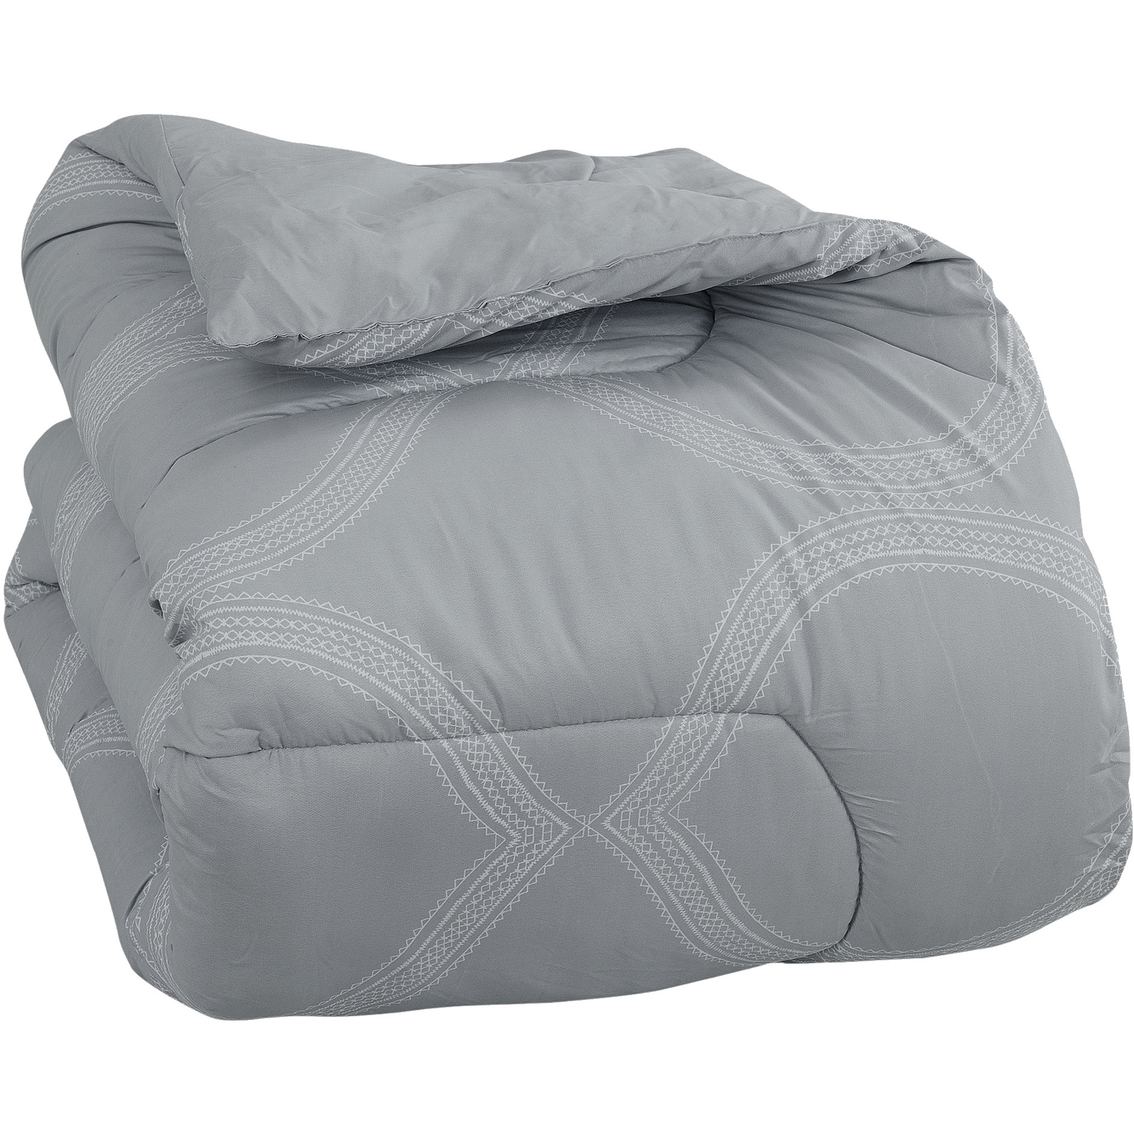 Ogee Bed in a Bag with Solid Reverse Comforter Queen - Image 1 of 4